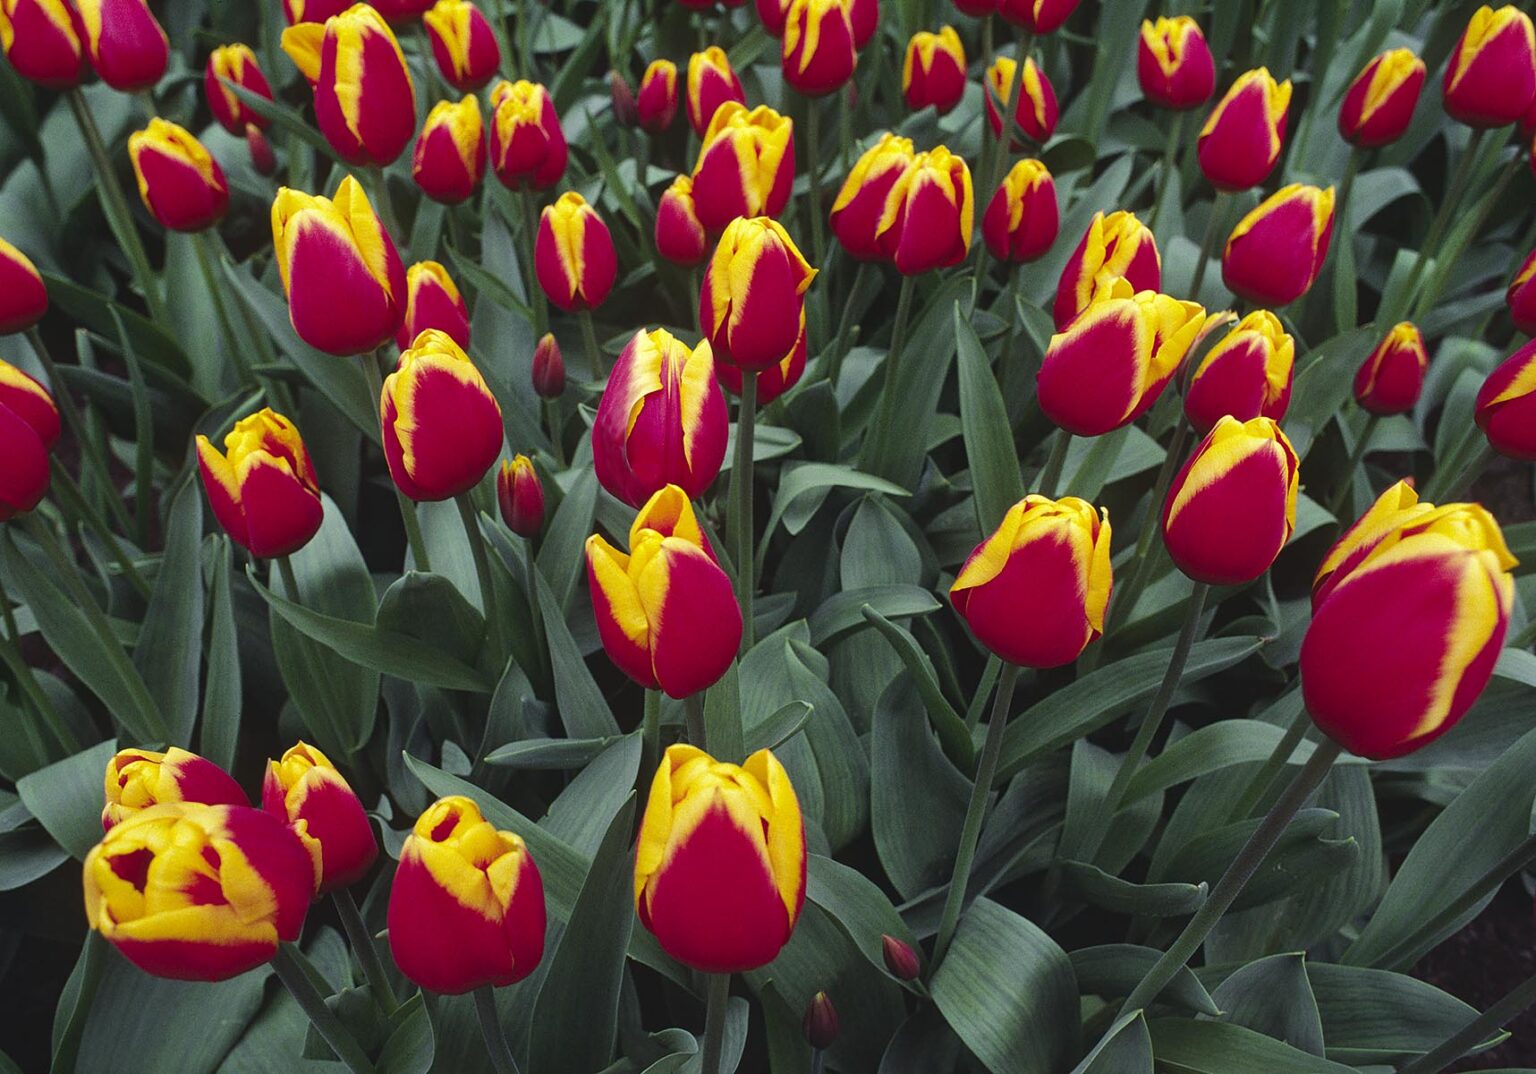 A spray of RED and YELLOW TULIPS at the KUKENHOFF GARDENS - THE NETHERLANDS